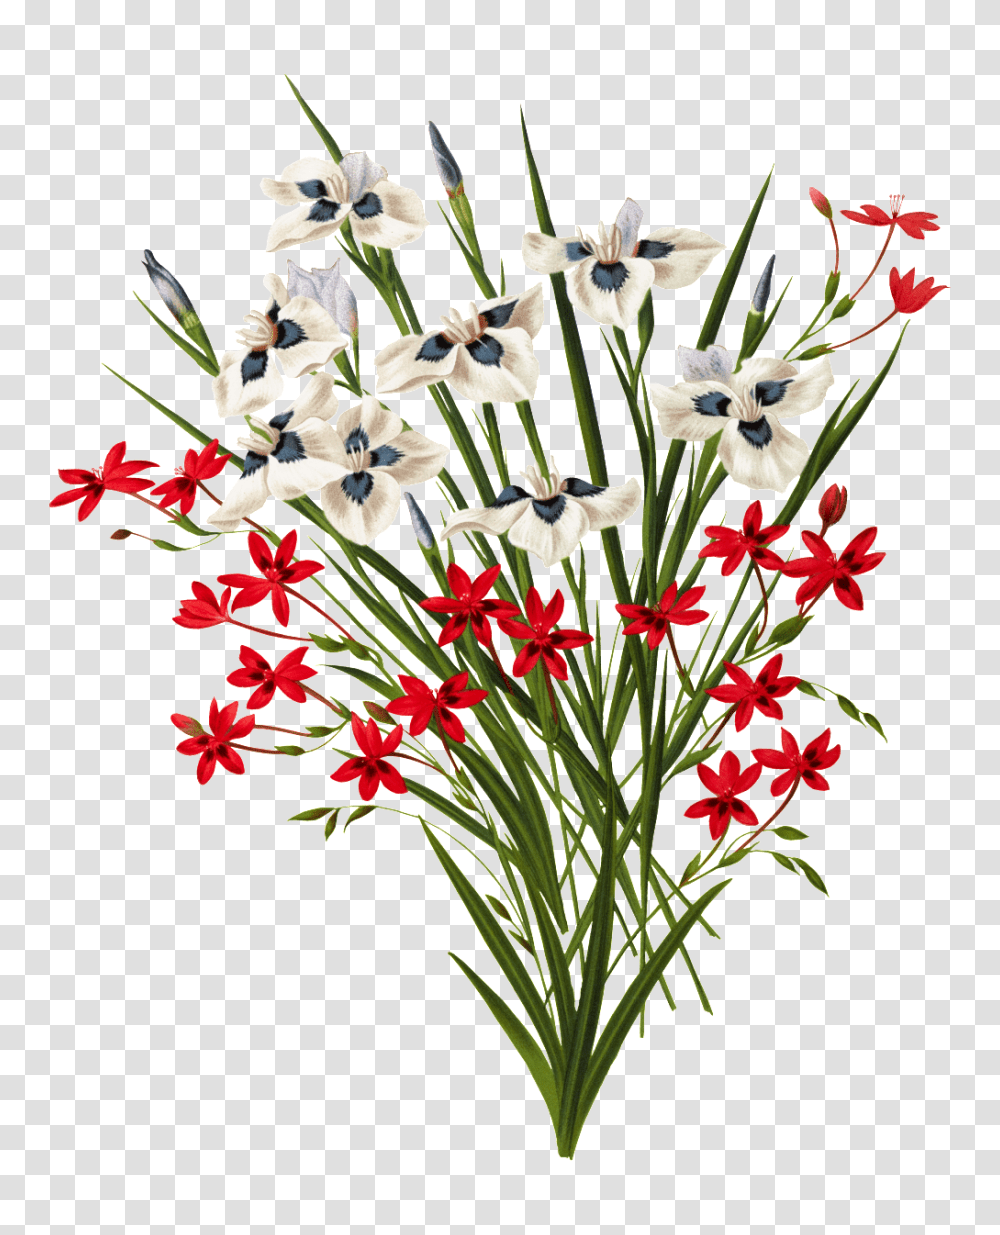 Beautiful Red And White Blooming Flowers Free Download, Plant, Blossom, Flower Bouquet, Flower Arrangement Transparent Png